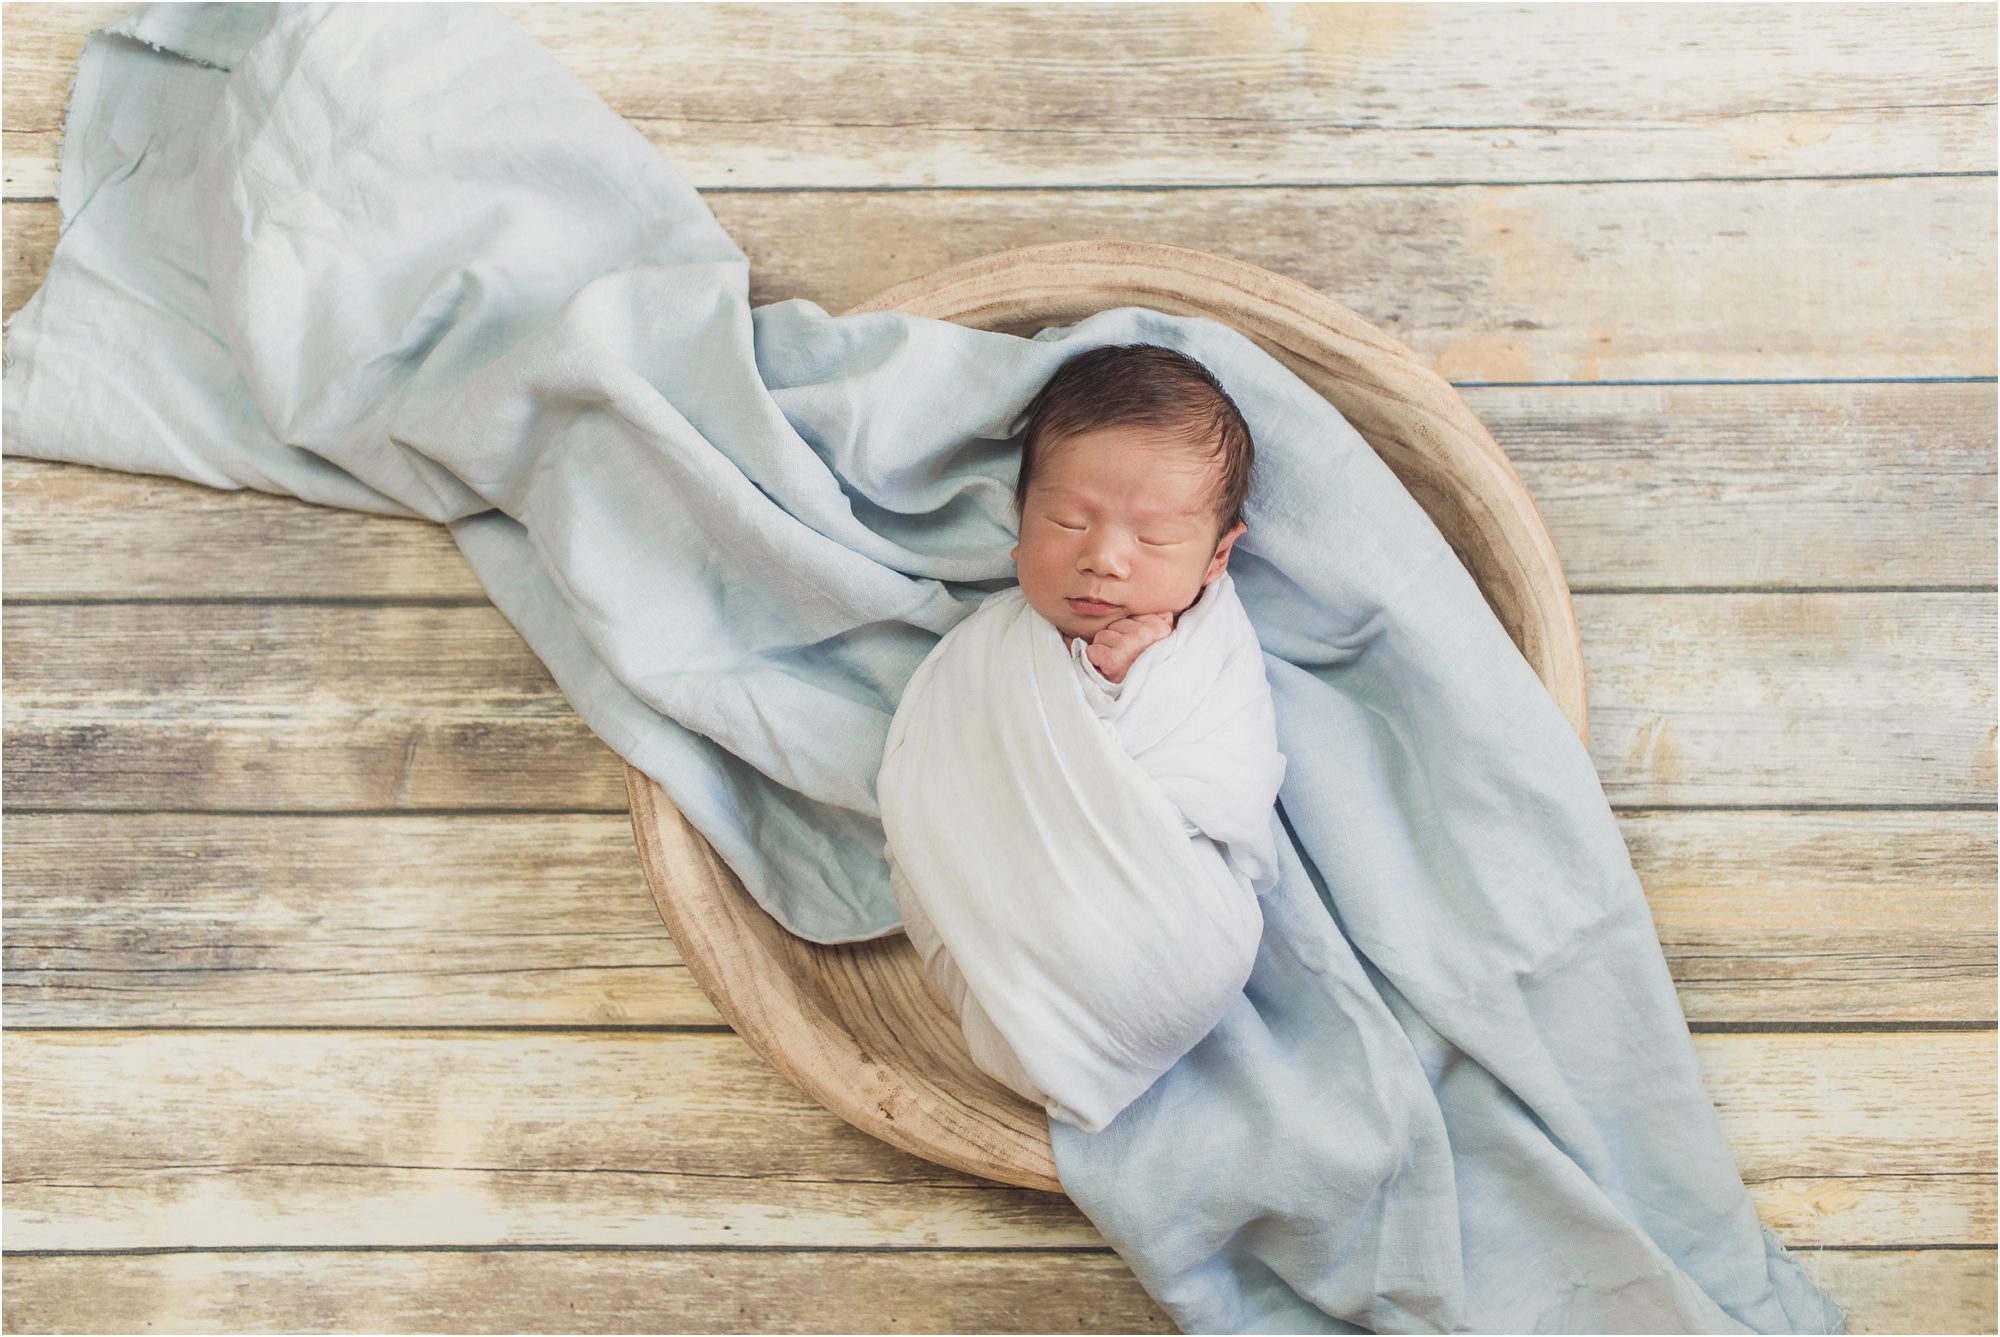 little oliver in a basket with a blue blanket photographed by marina del rey newborn photograper, sun & sparrow